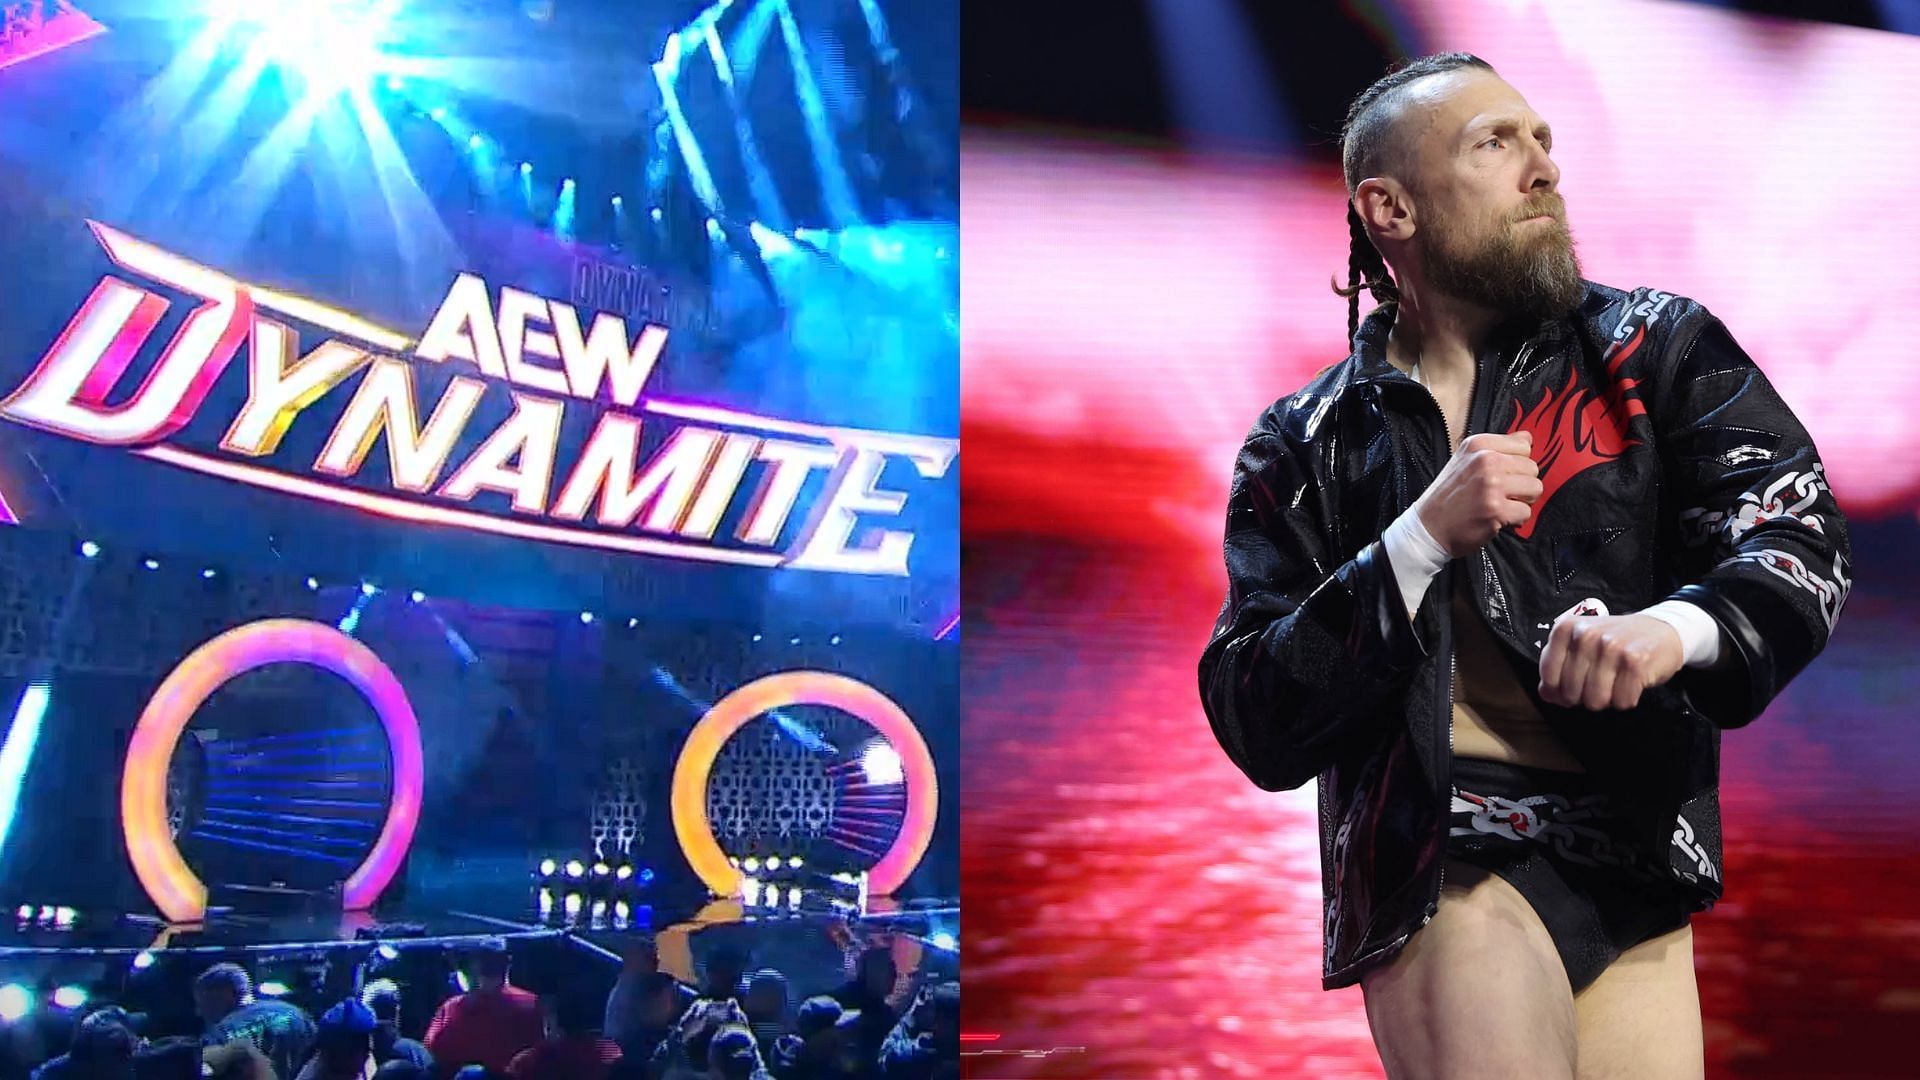 Bryan Danielson is a WWE Grand Slam Champion who is now with AEW [Photos courtesy of AEW